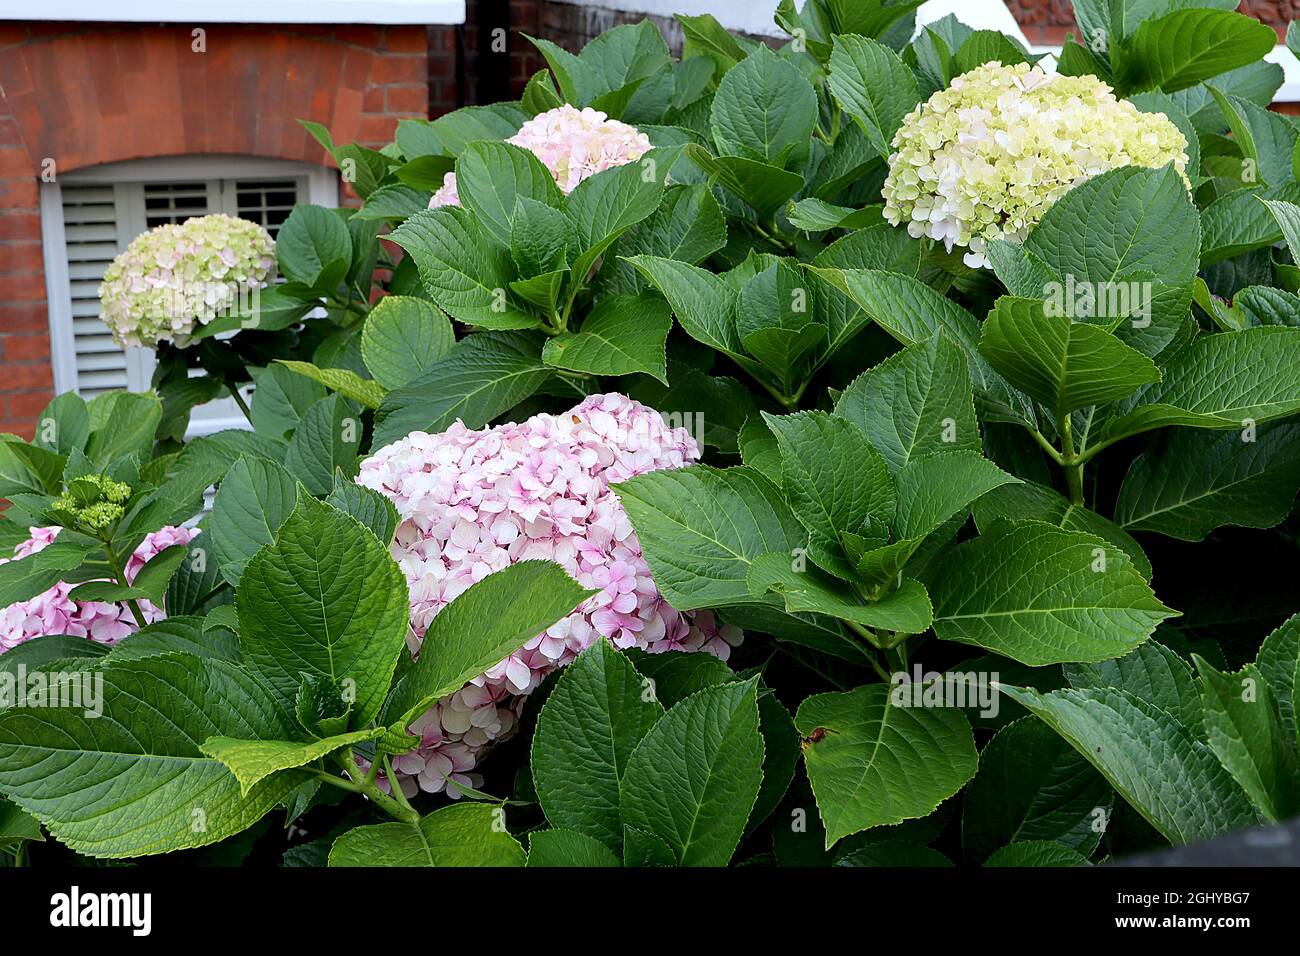 Hydrangea arborescens ‘Incrediball’ and ‘Incrediball Blush’ Hydrangea arborescens Strong Annabelle - giant flowerheads of white, pale green and pink, Stock Photo